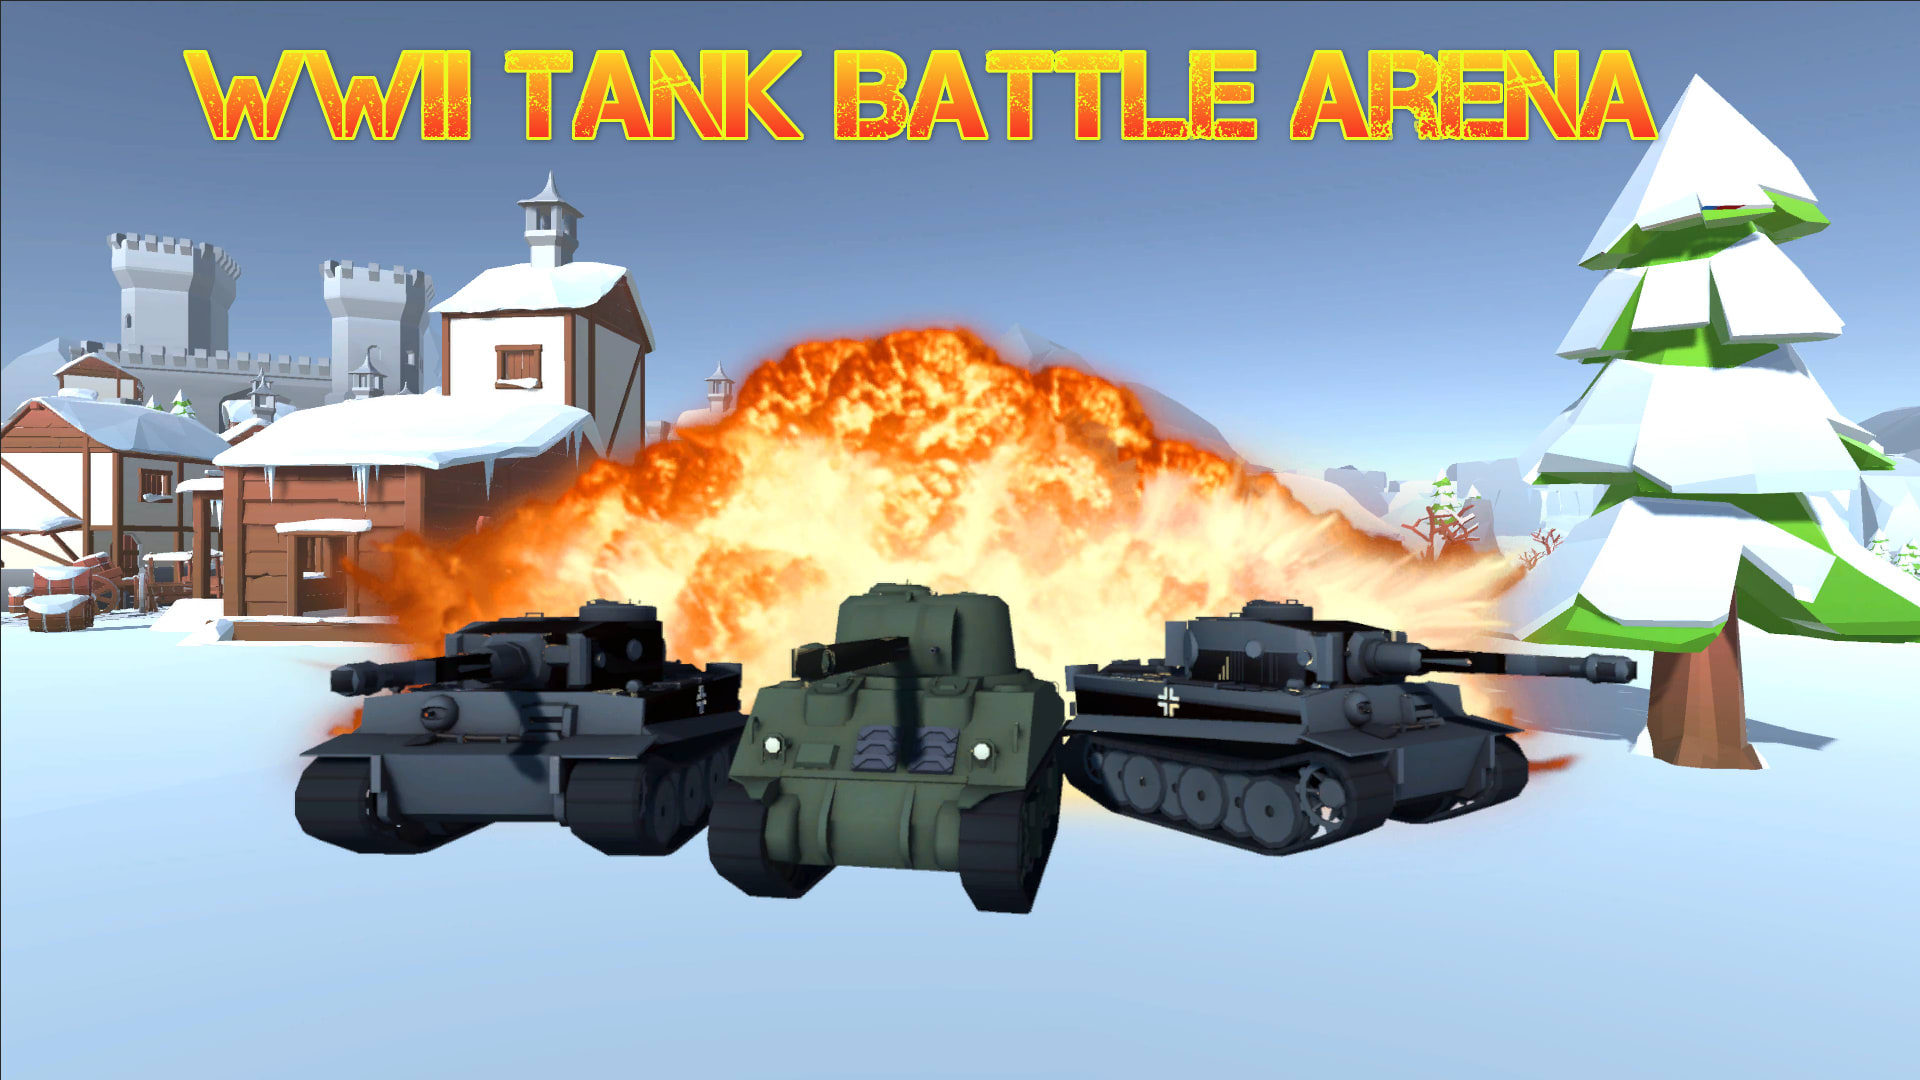 WWII Tank Battle Arena